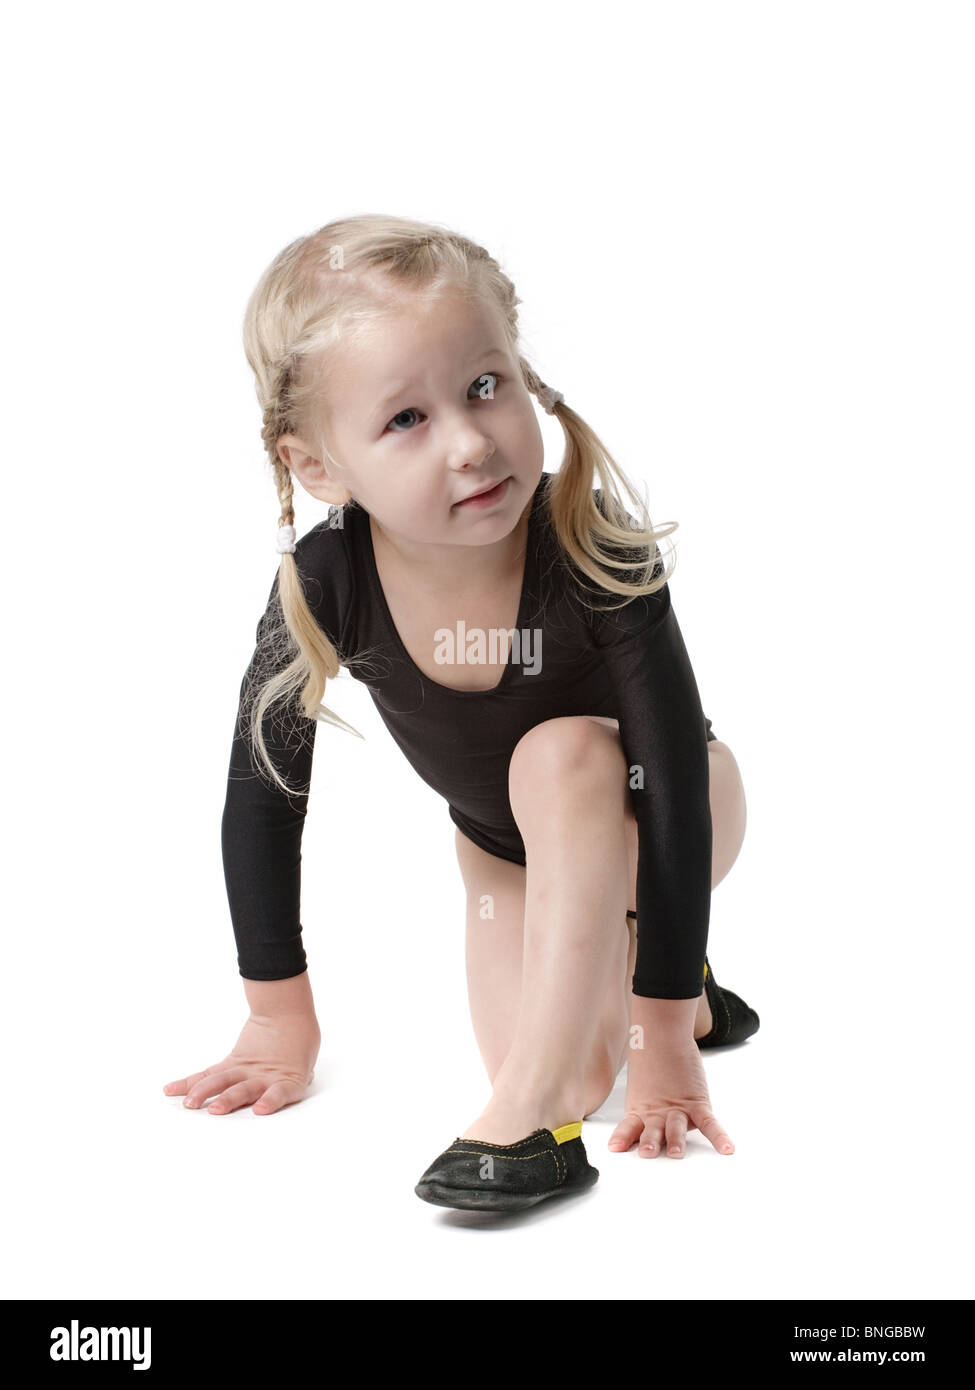 little girl in bodysuit for rhythmic gymnastics trying to do the splits isolated on white Stock Photo